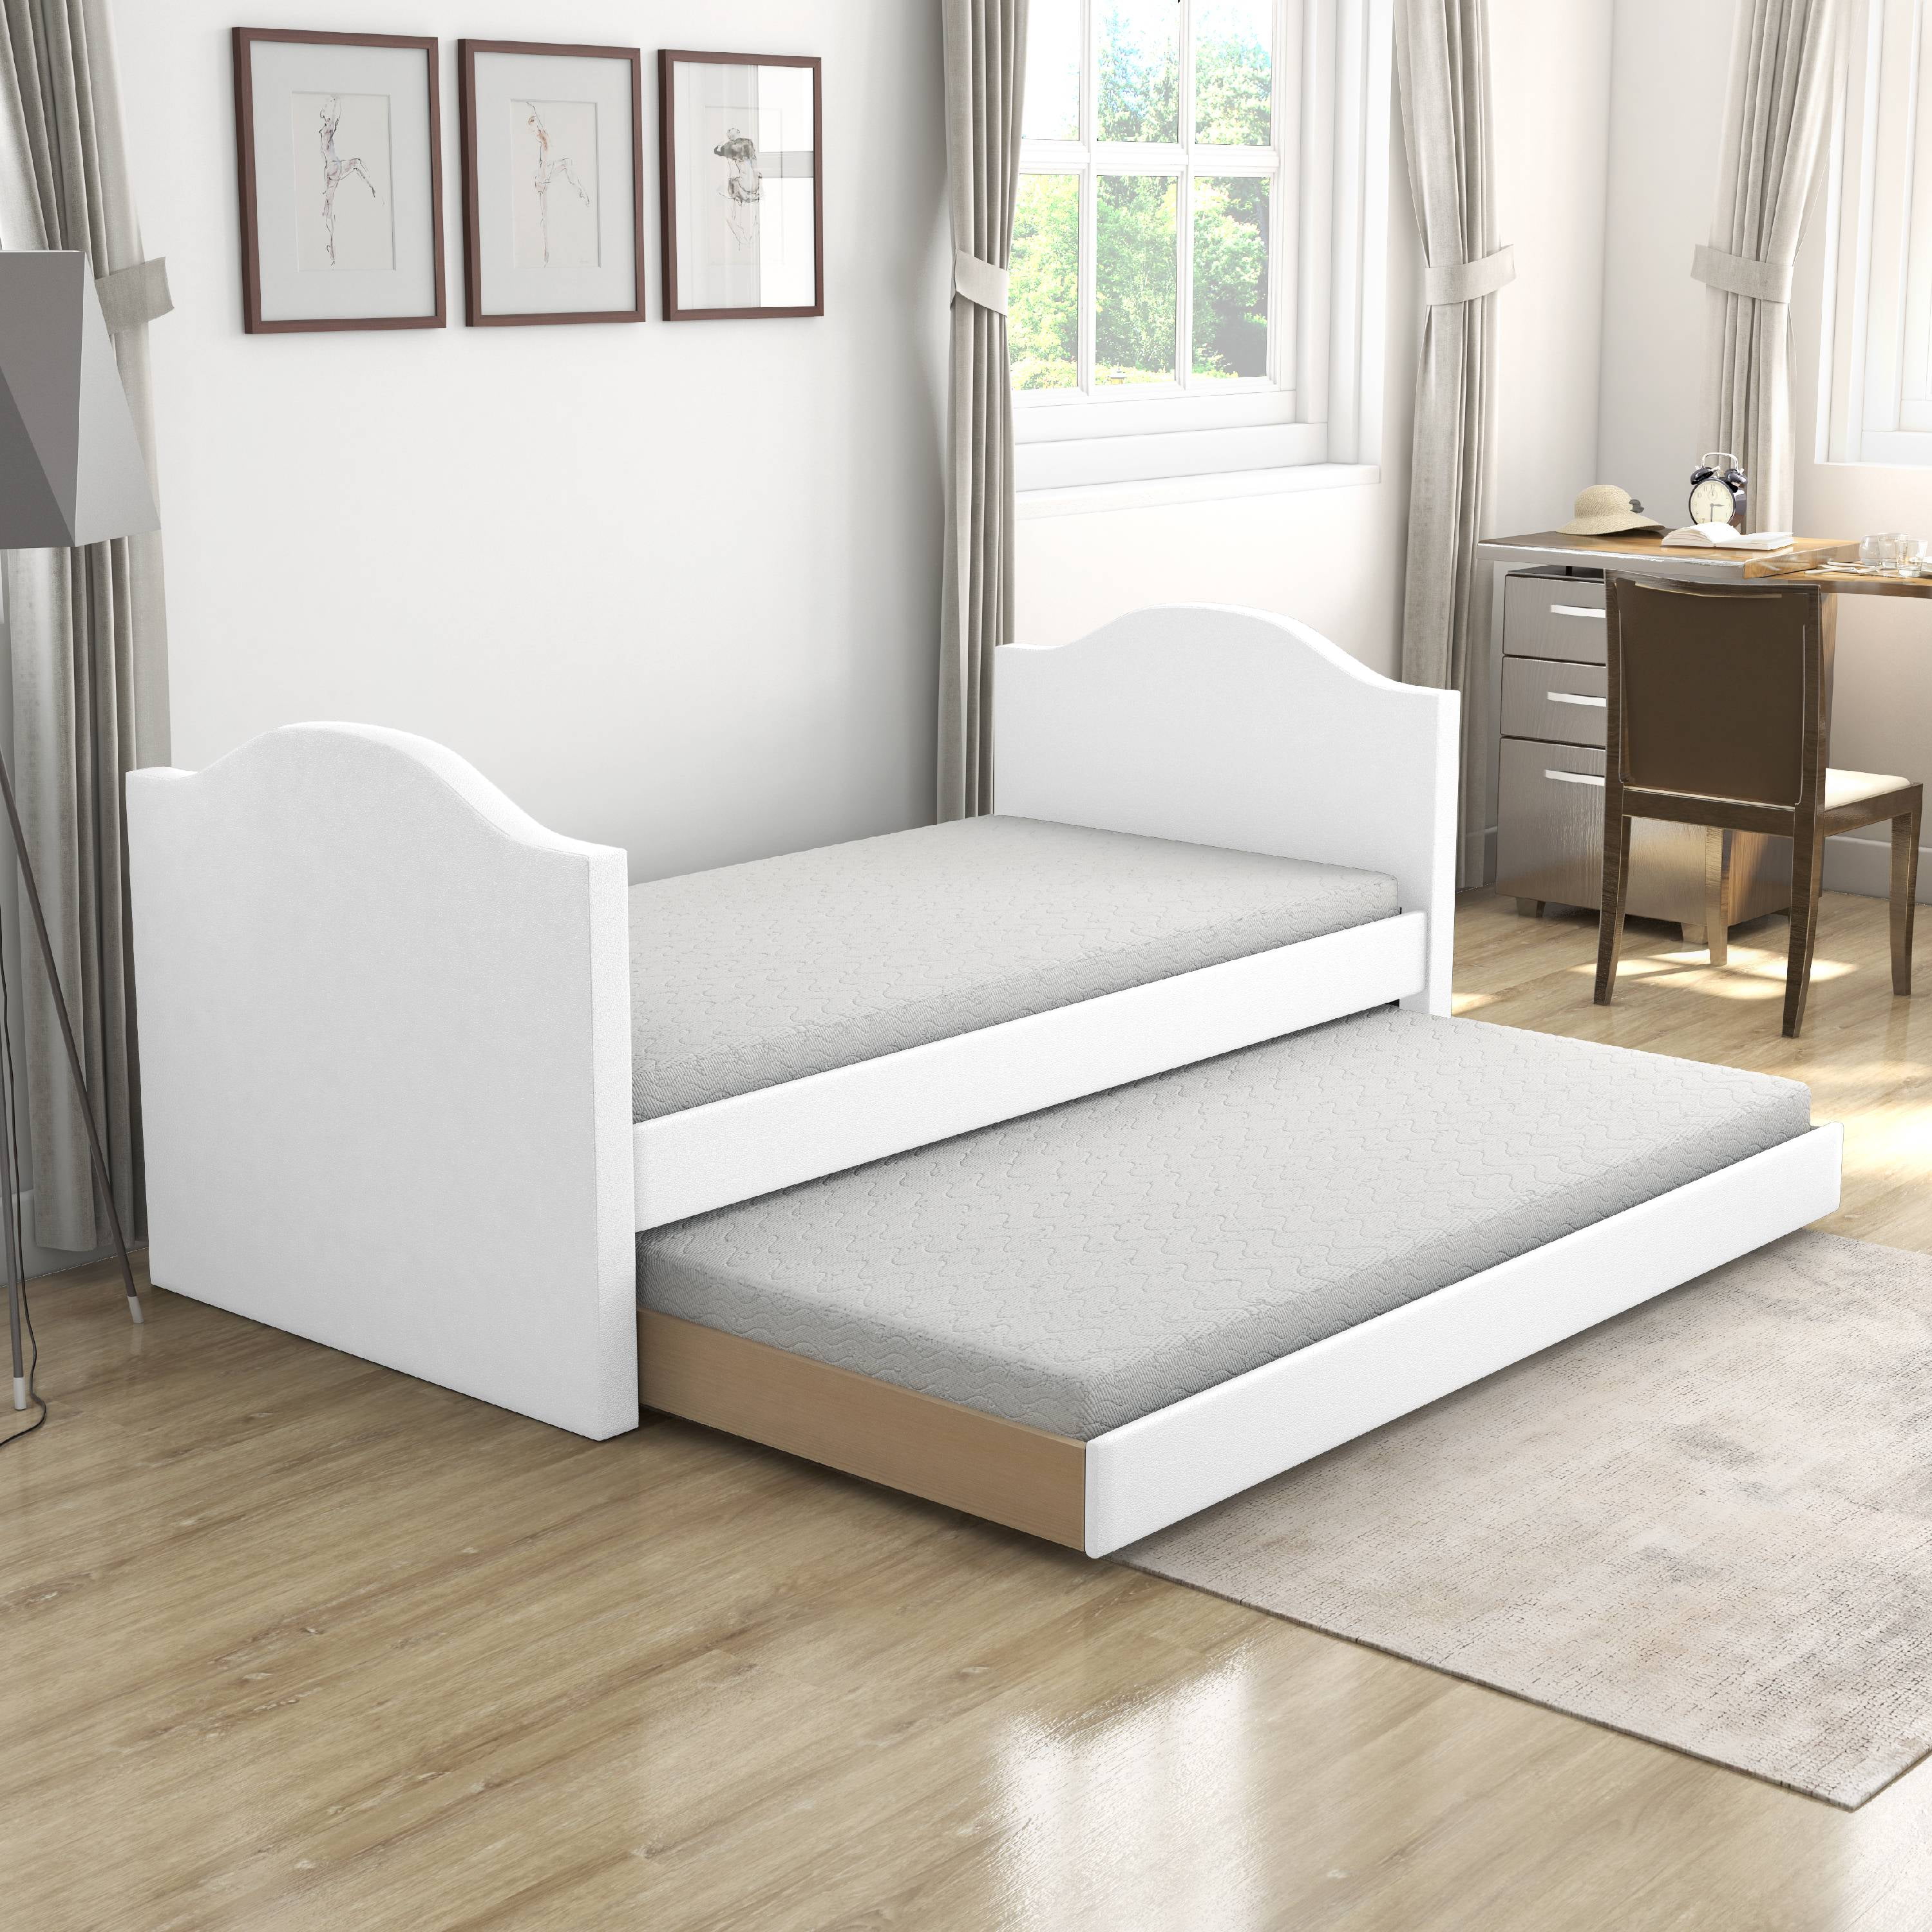 Premier Melissa White Upholstered Faux, White Leather Trundle Bed